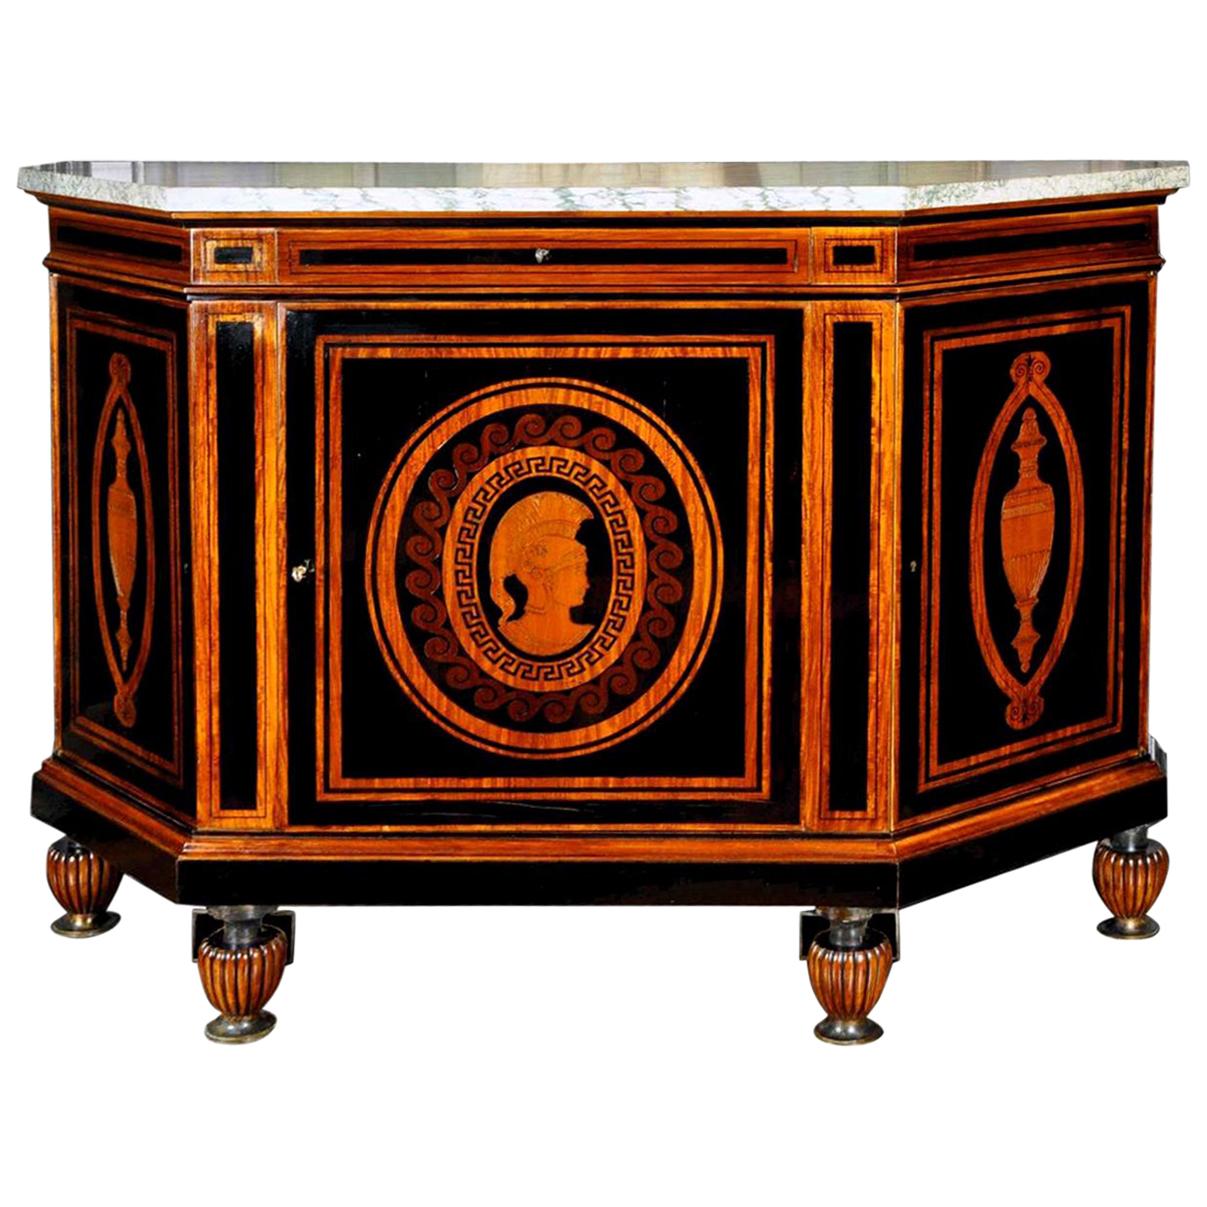 Curious French Sideboard Signed E. Duru